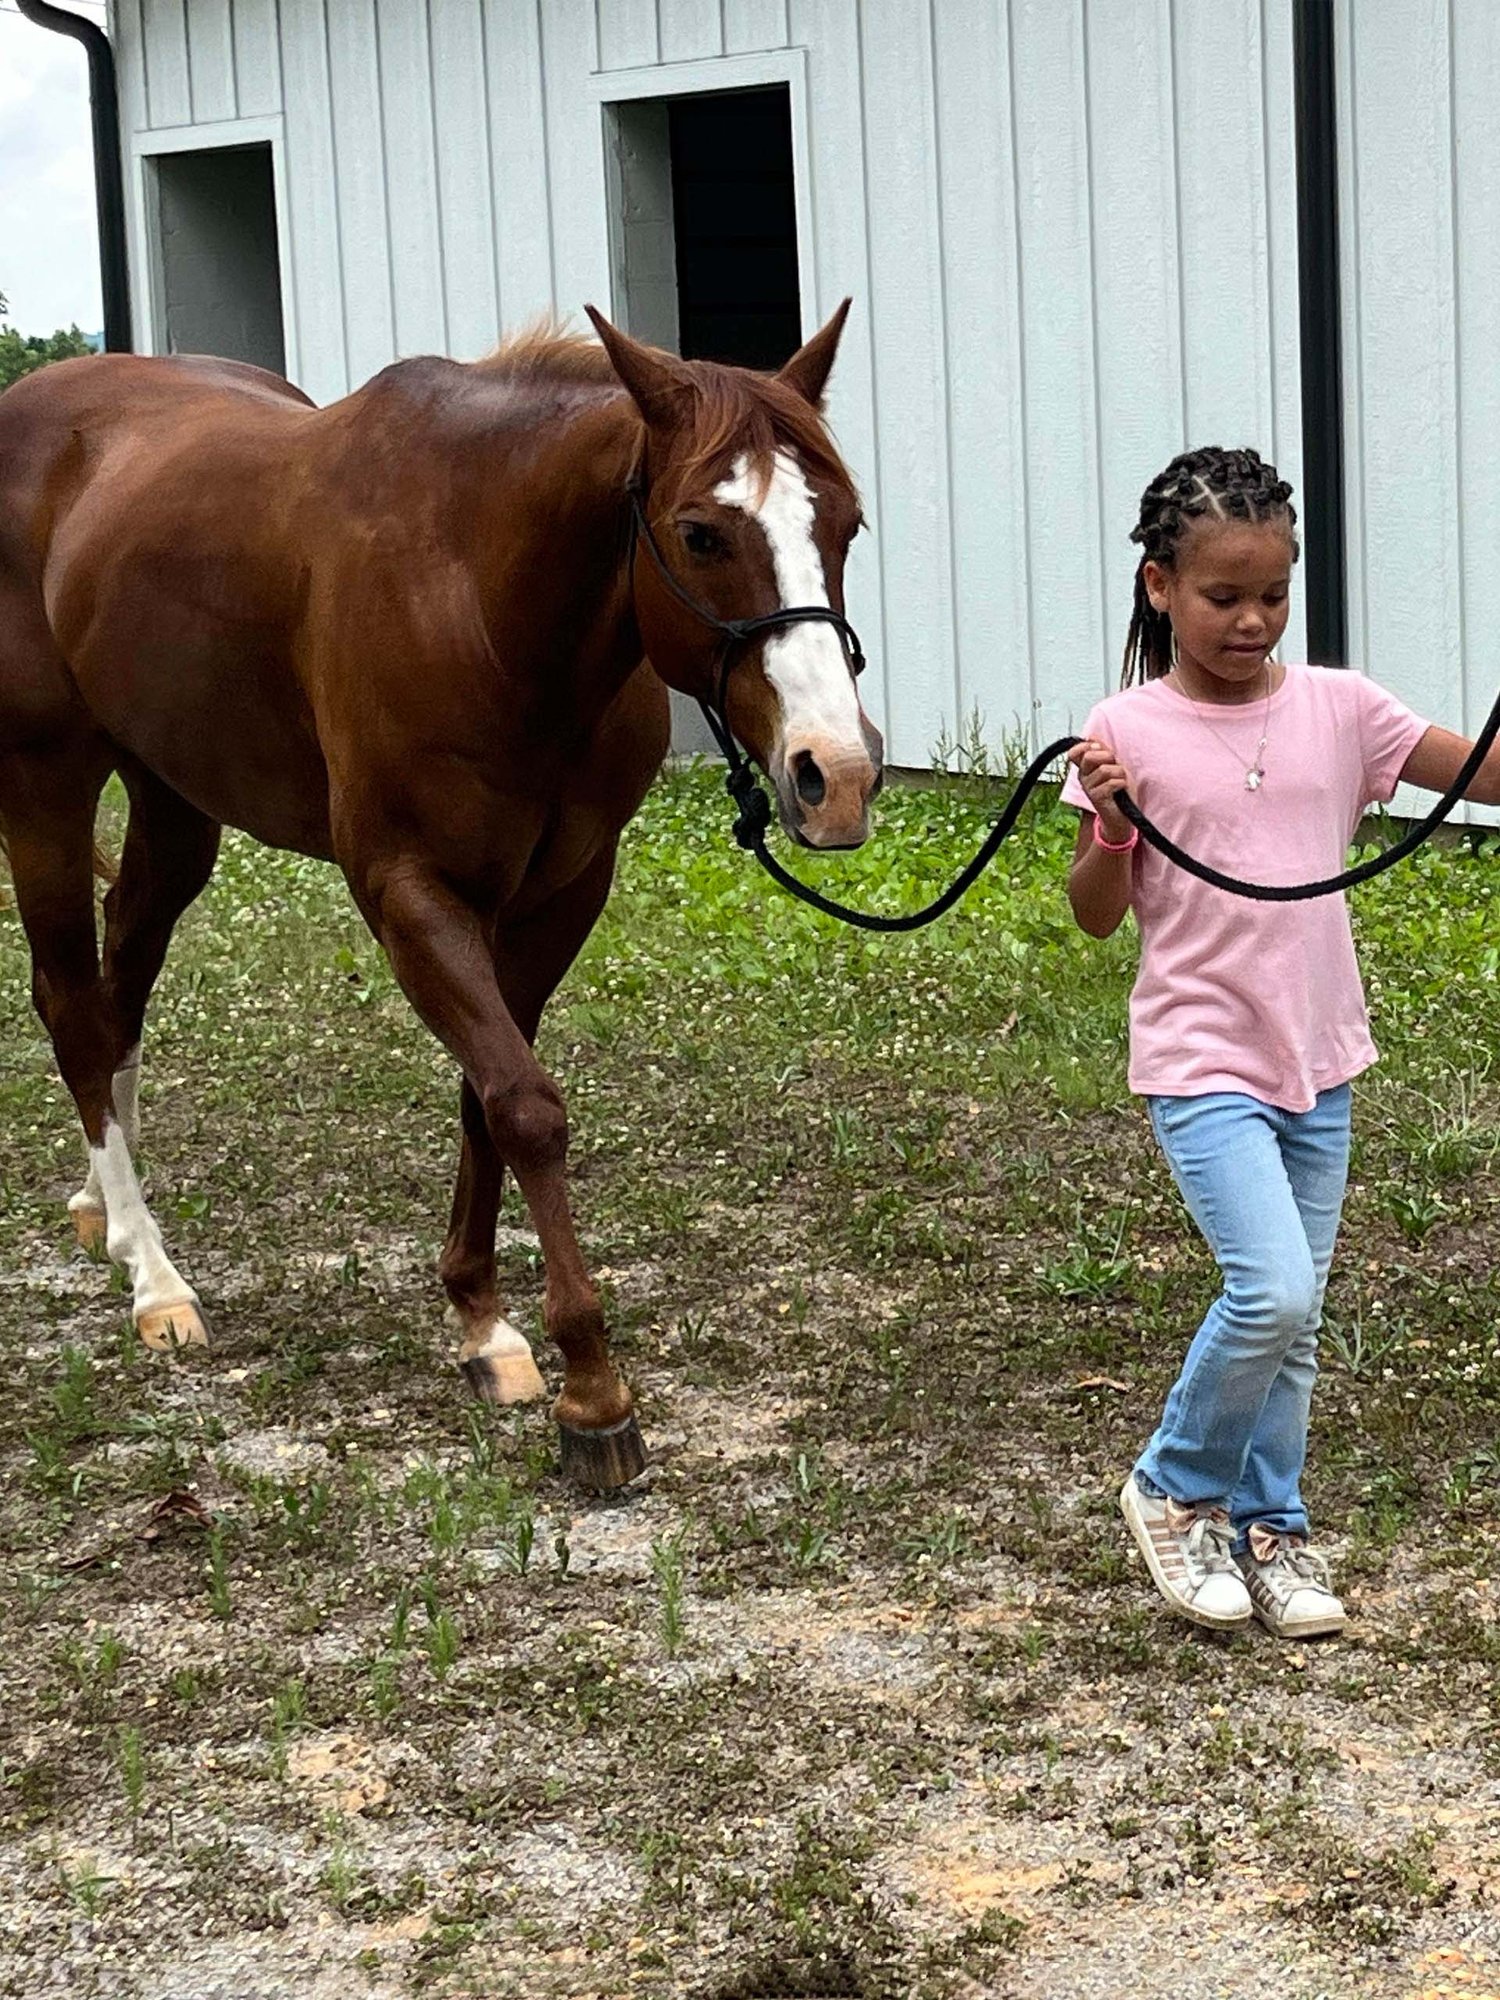 Tiana learning to lead her horse